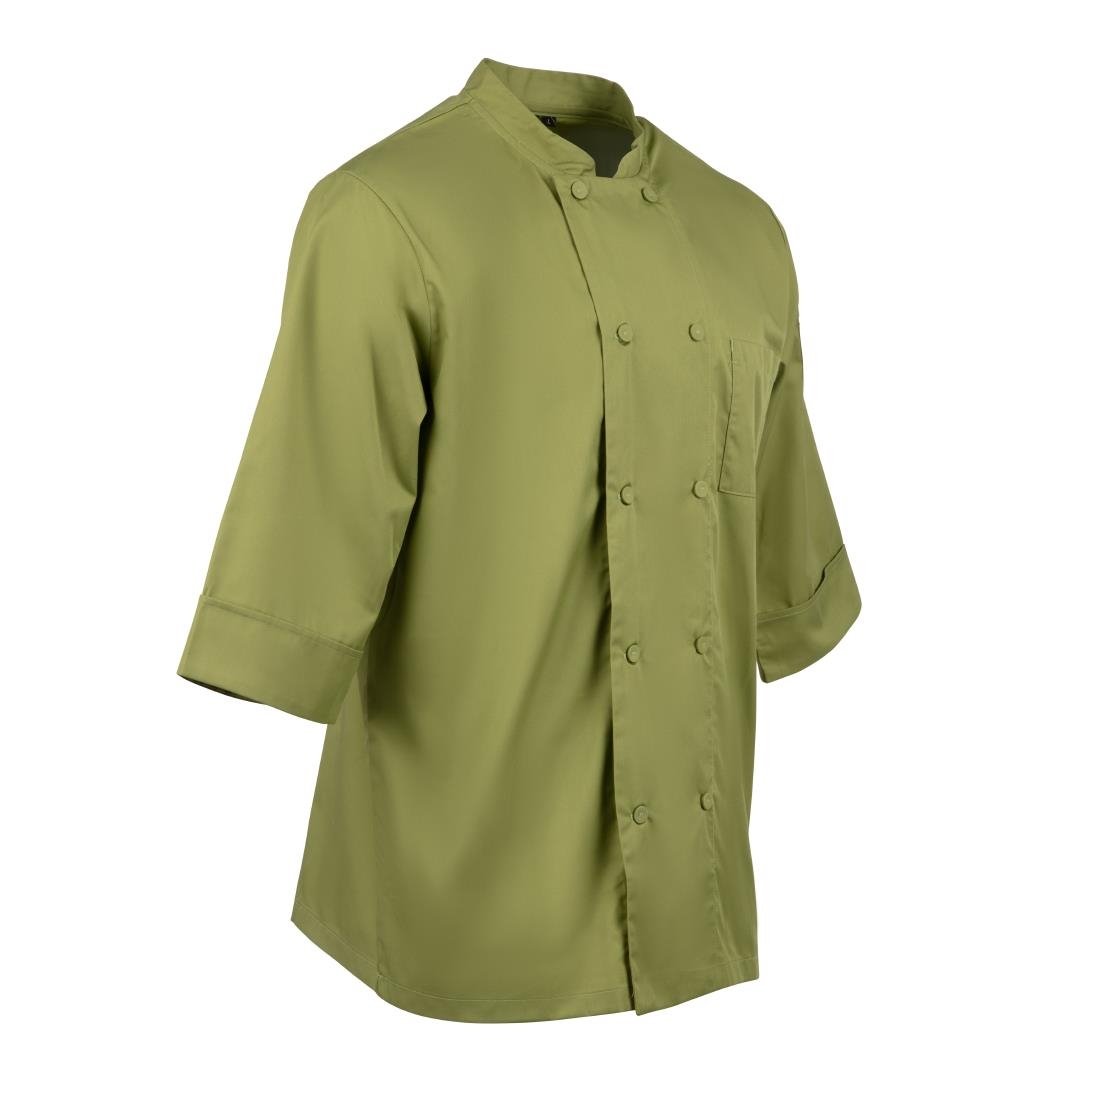 B107-XS Chef Works Unisex Chefs Jacket Lime XS JD Catering Equipment Solutions Ltd